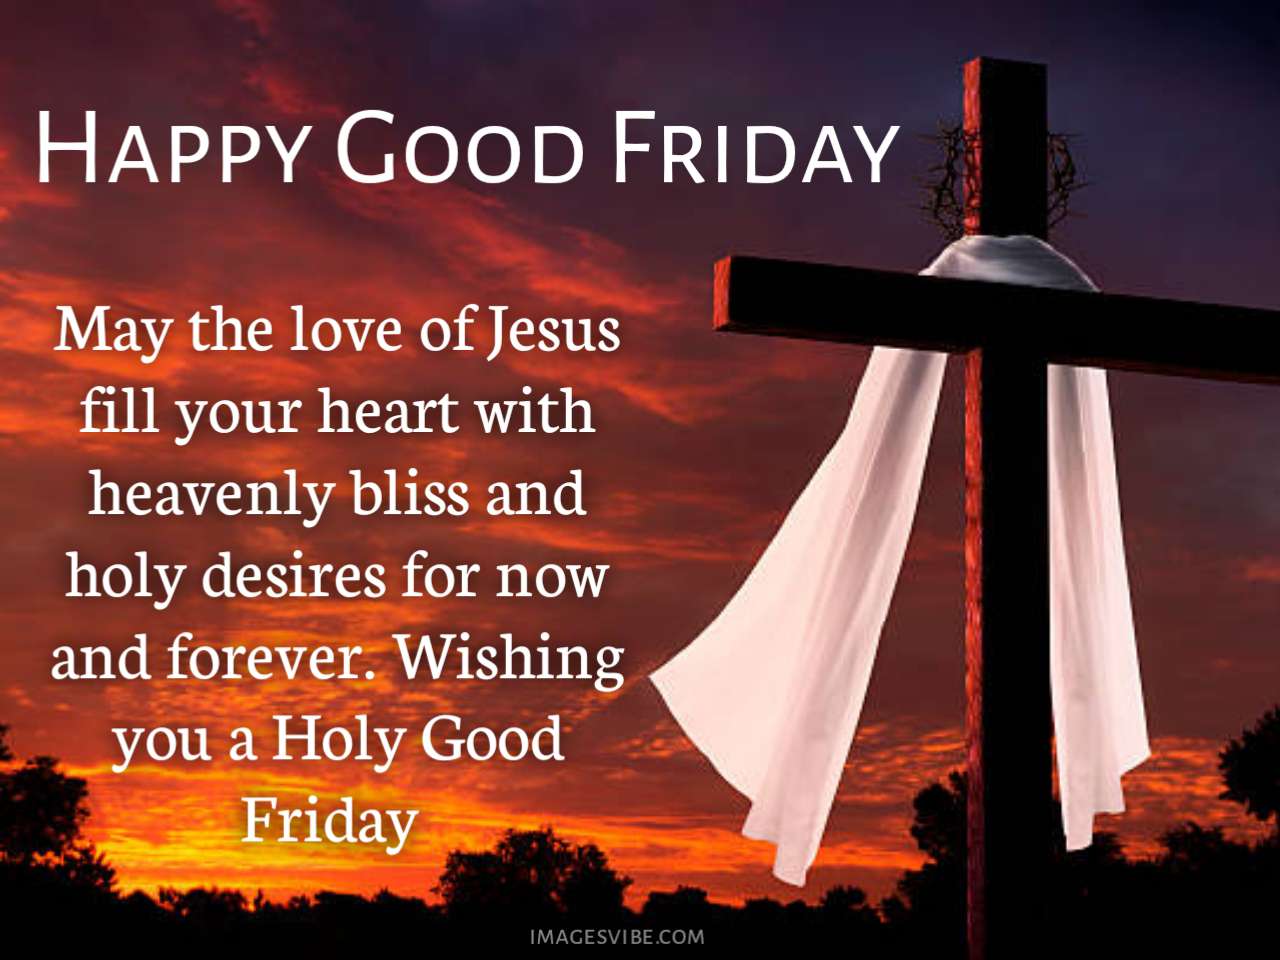 Best 30+ Happy Good Friday Images & Wishes - Images Vibe